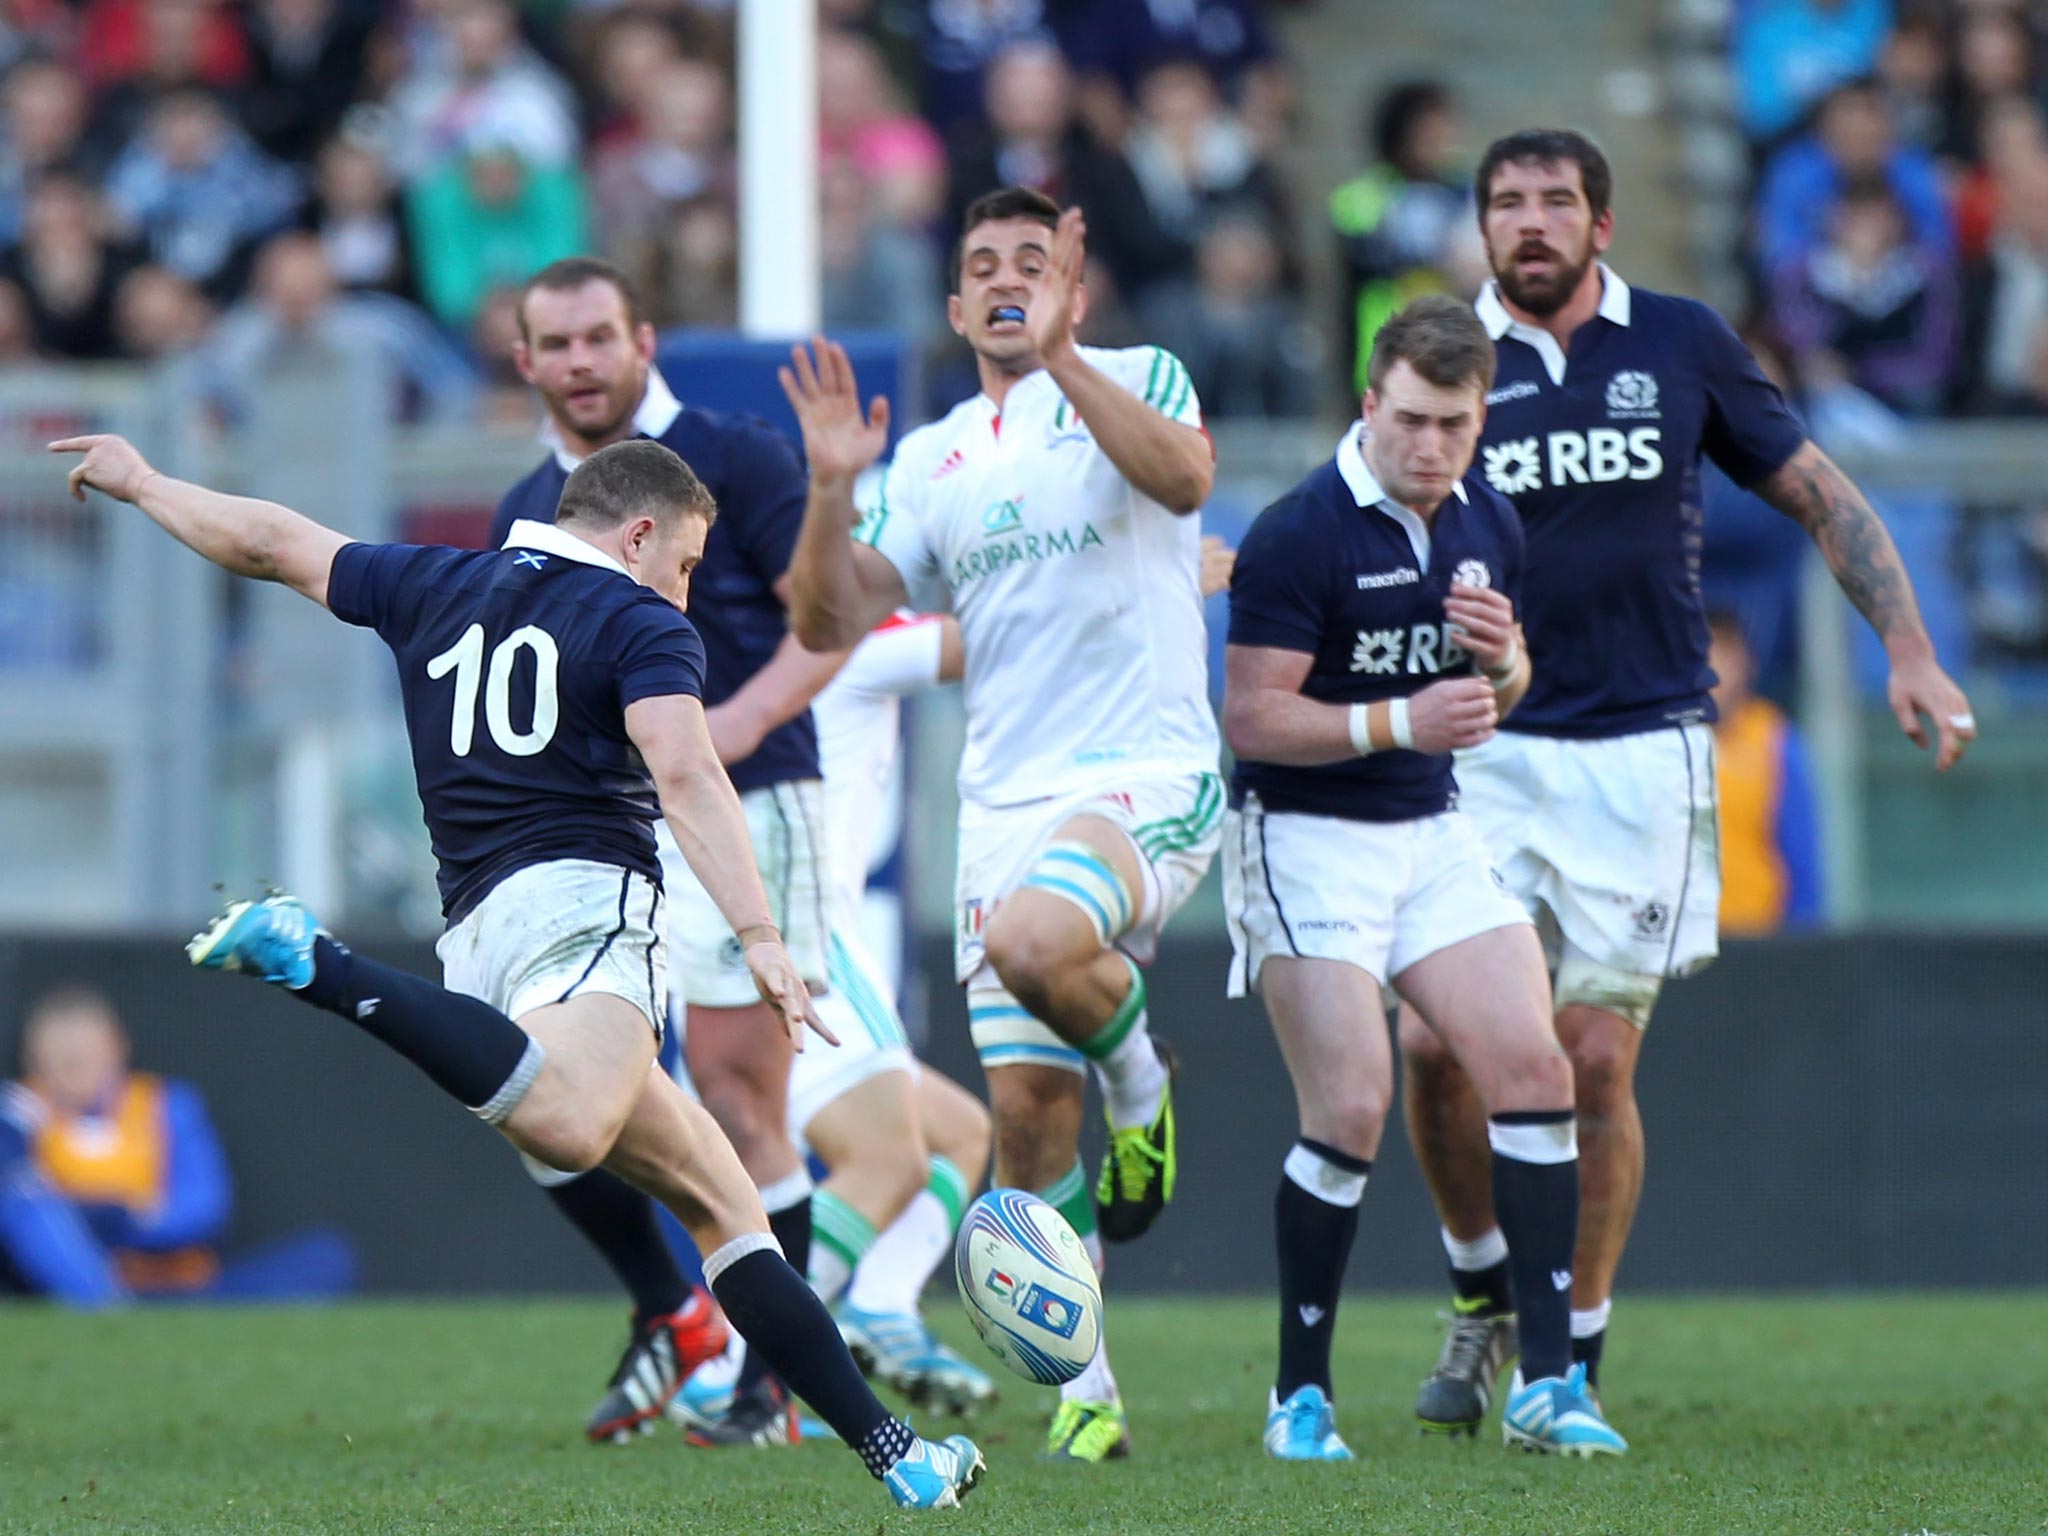 Duncan Weir’s last-gasp drop goal against Italy gave Scotland
victory in Rome last month